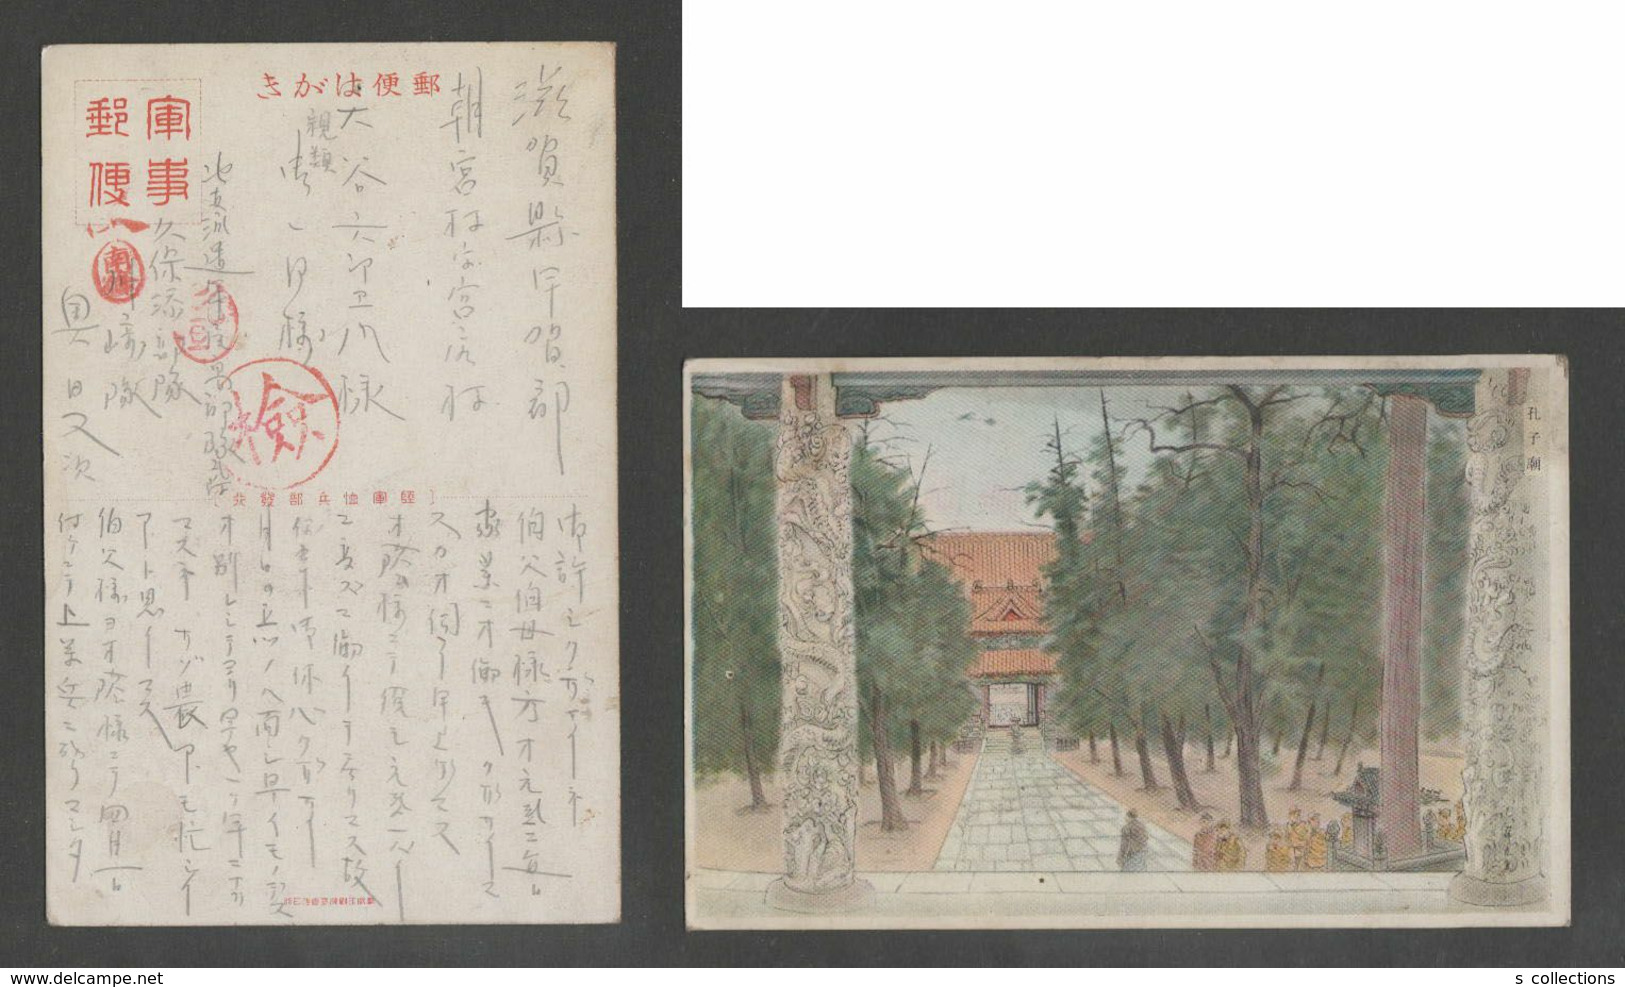 JAPAN WWII Military Temple Of Confucius Picture Postcard NORTH CHINA WW2 MANCHURIA CHINE MANDCHOUKOUO JAPON GIAPPONE - 1941-45 Chine Du Nord